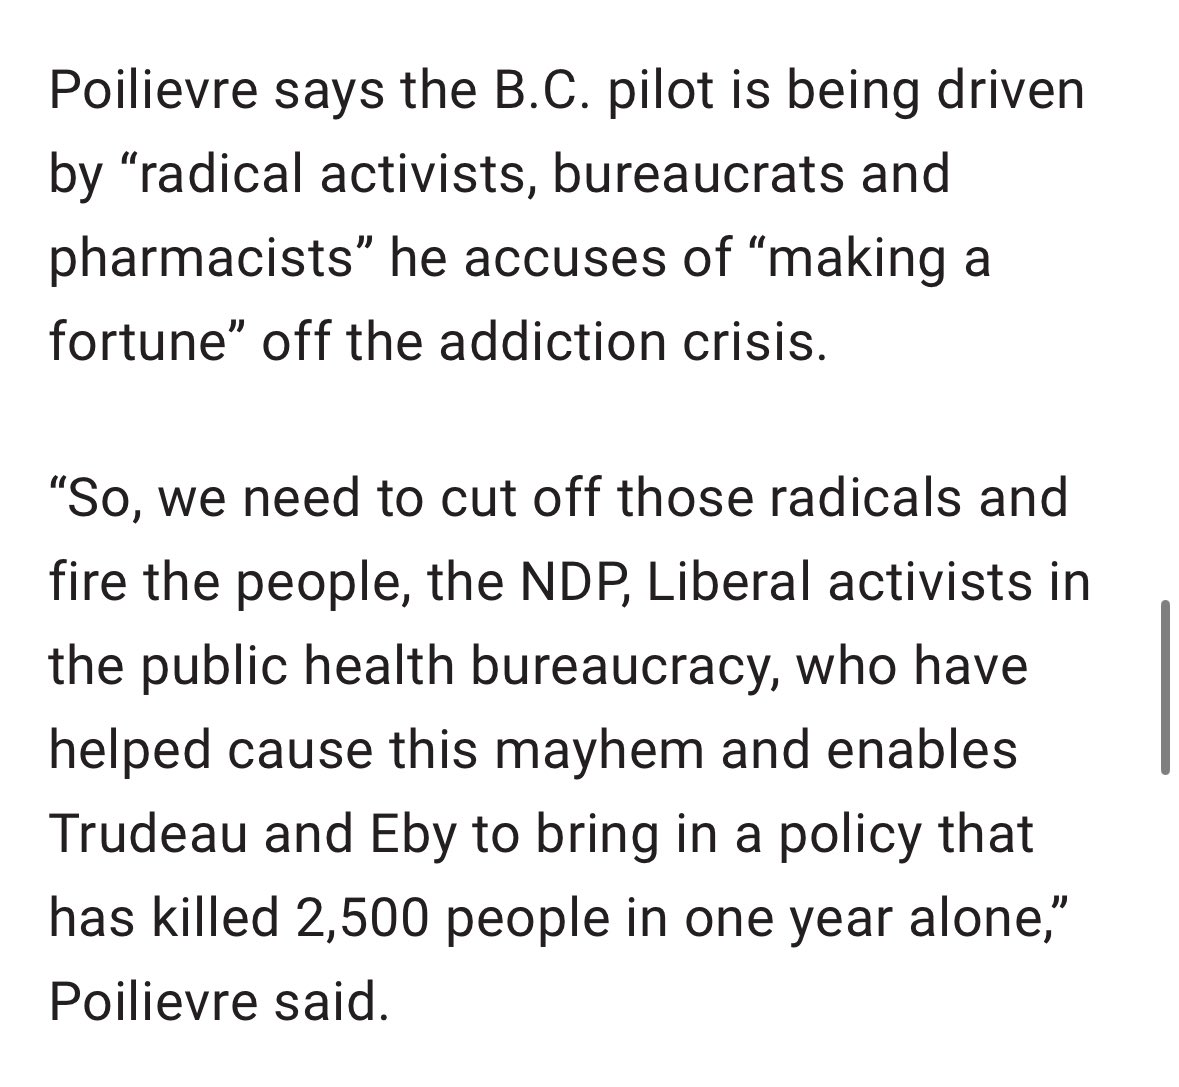 Poilievre is blaming safe supply policies for all of BC’s drug overdose deaths. How does he explain the record-high number of those deaths in Alberta, which has the very policies and approach he says he’d implement as PM?